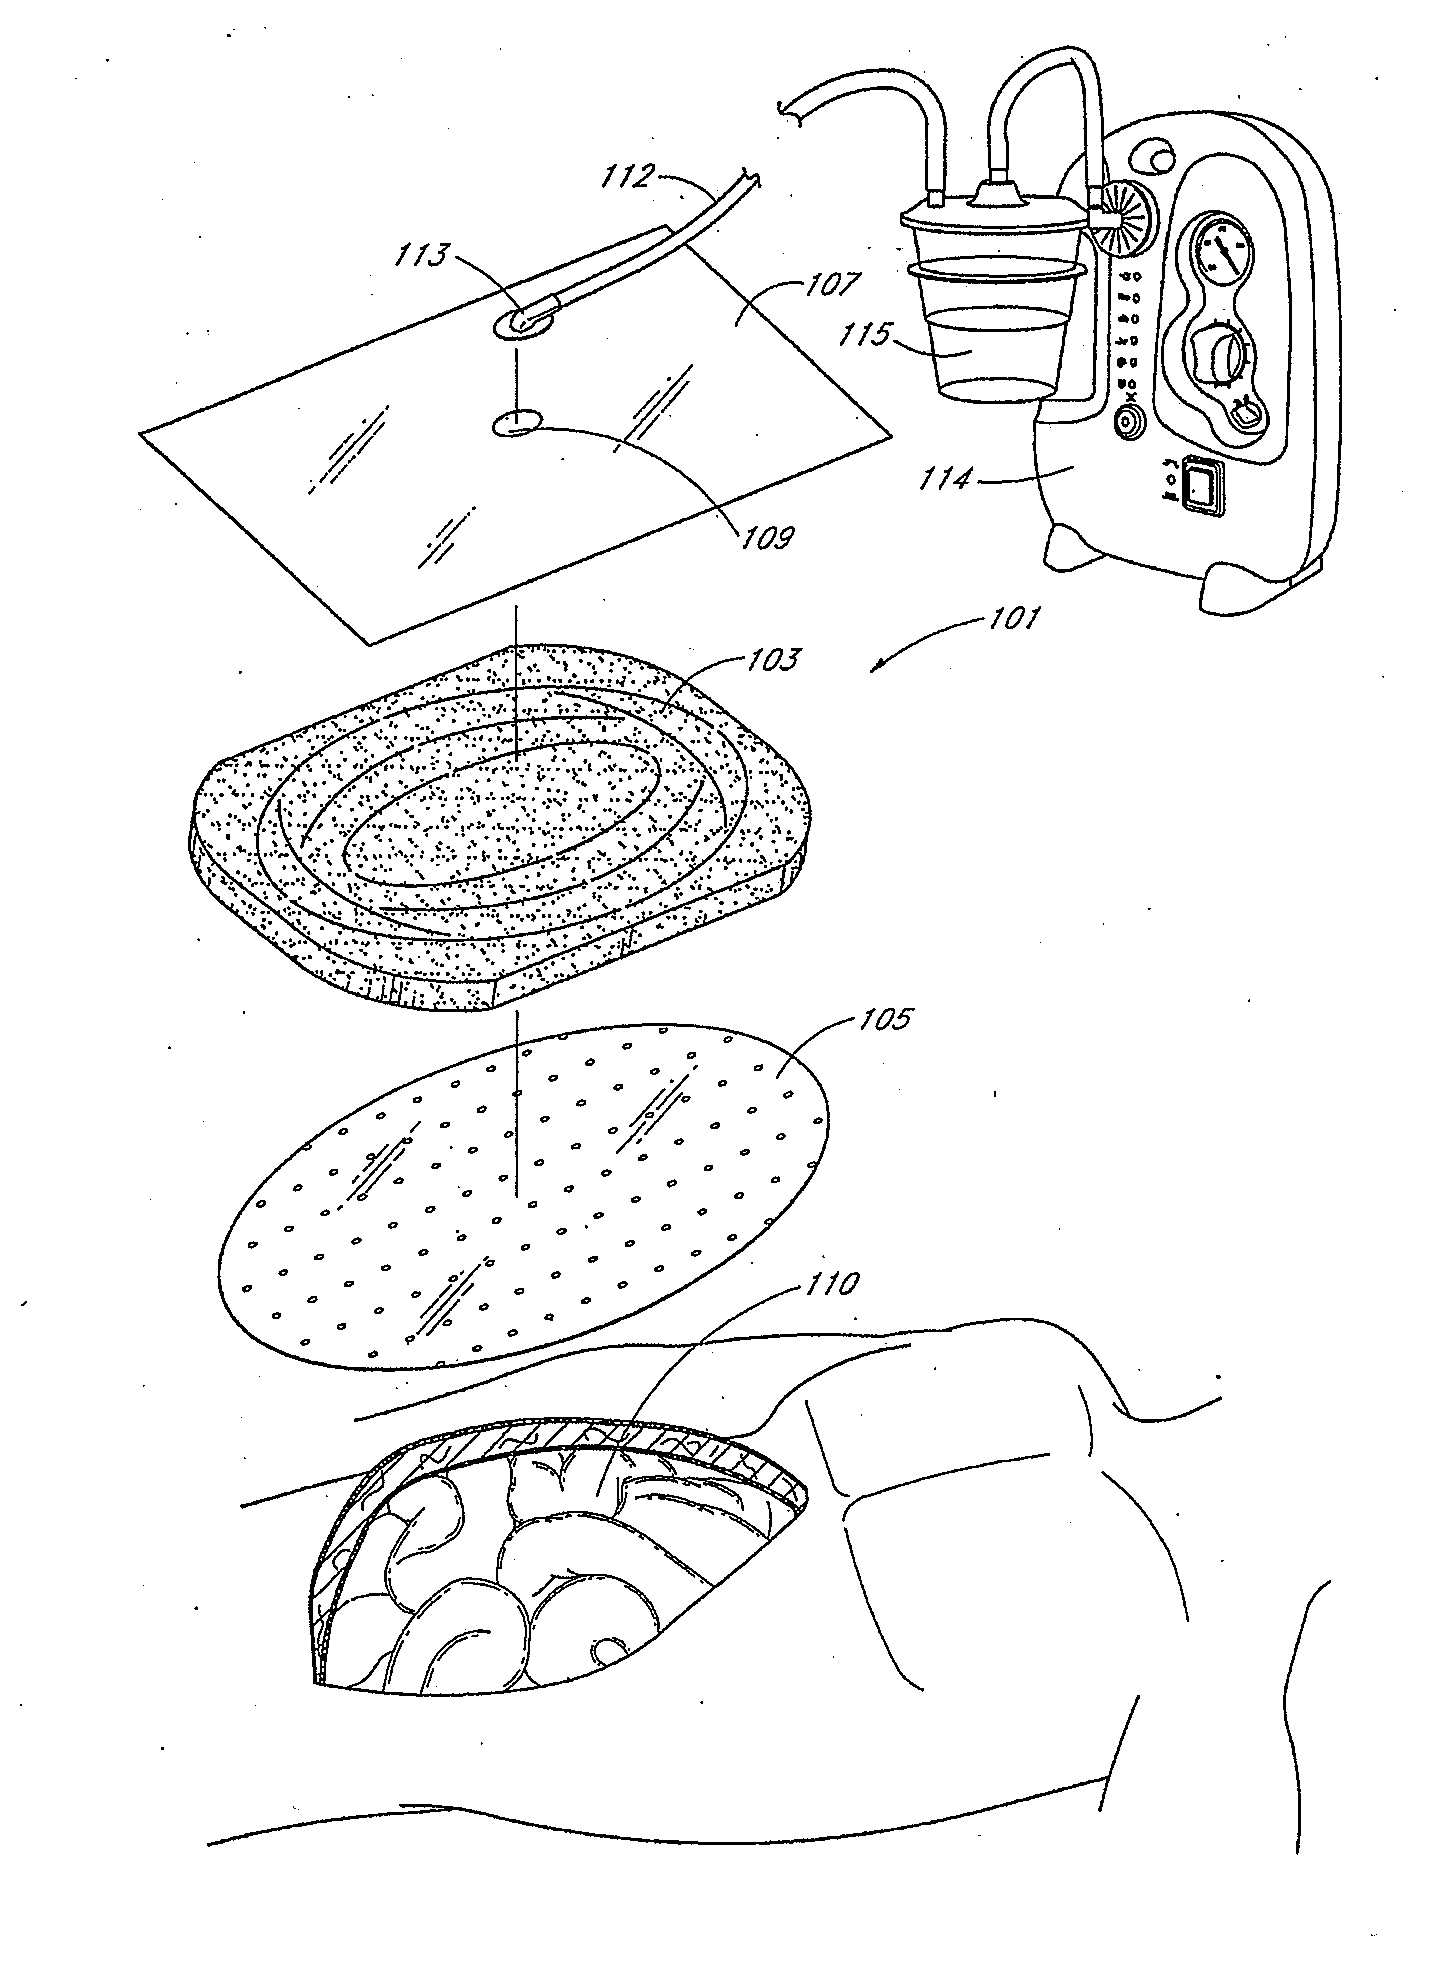 Bespoke wound treatment apparatuses and methods for use in negative pressure wound therapy